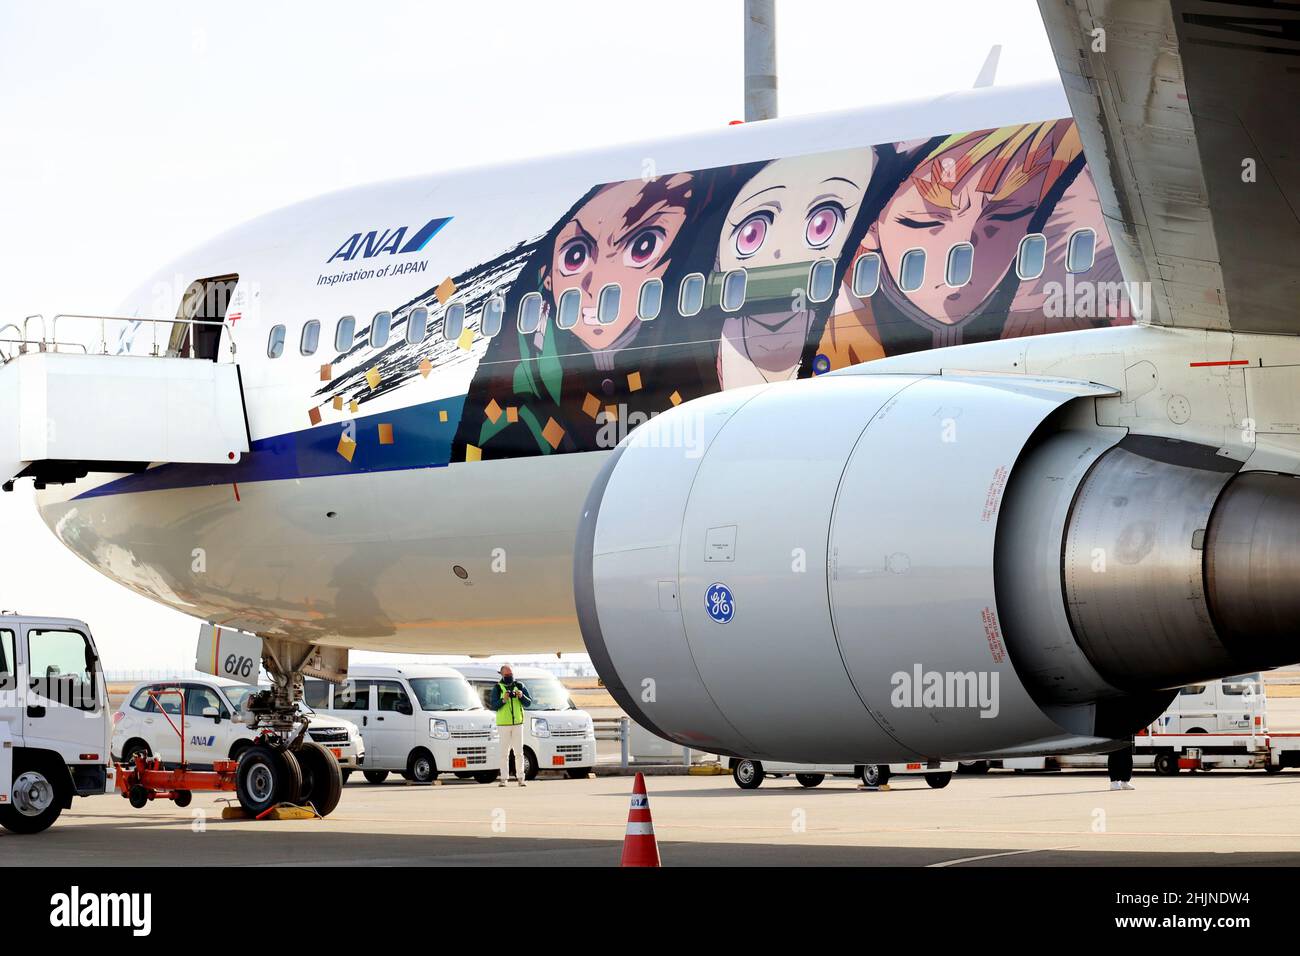 Tokyo, Japan. 30th Jan, 2022. Japanese largest air carrier All Nippon Airways' (ANA) B-767 jet designed with characters of mega hit comics and animation series 'Demon Slayer' is displayed at Tokyo's Haneda airport for a chartered flight on Sunday, January 30, 2022. ANA will start commercial flights of 'Demon Slayer' jet on domestic routes from January 31. Credit: Yoshio Tsunoda/AFLO/Alamy Live News Stock Photo